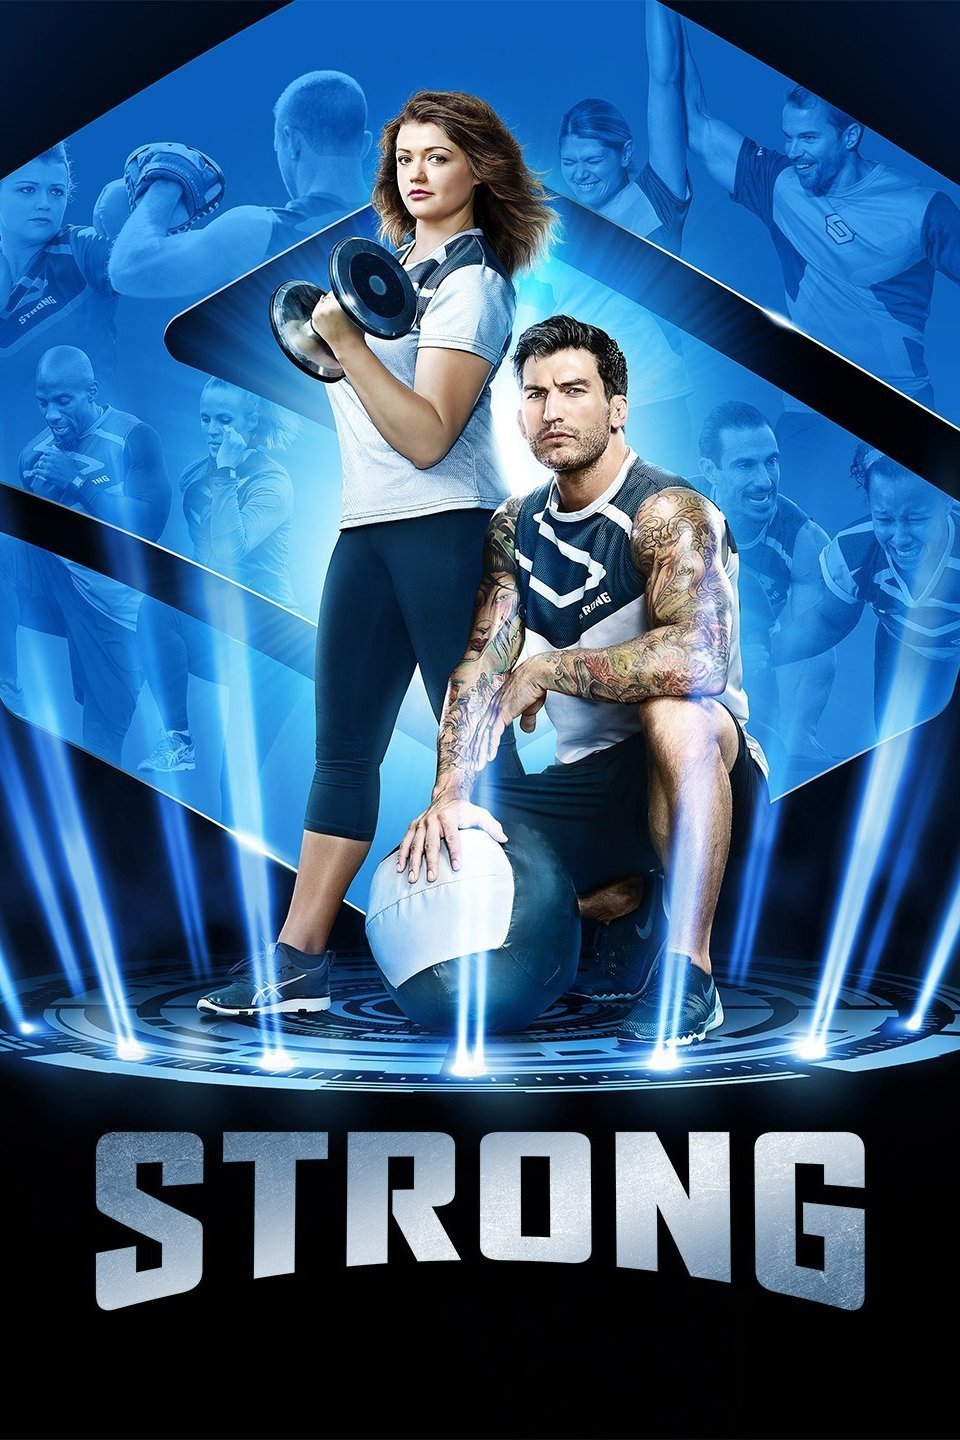 Poster of the movie Strong